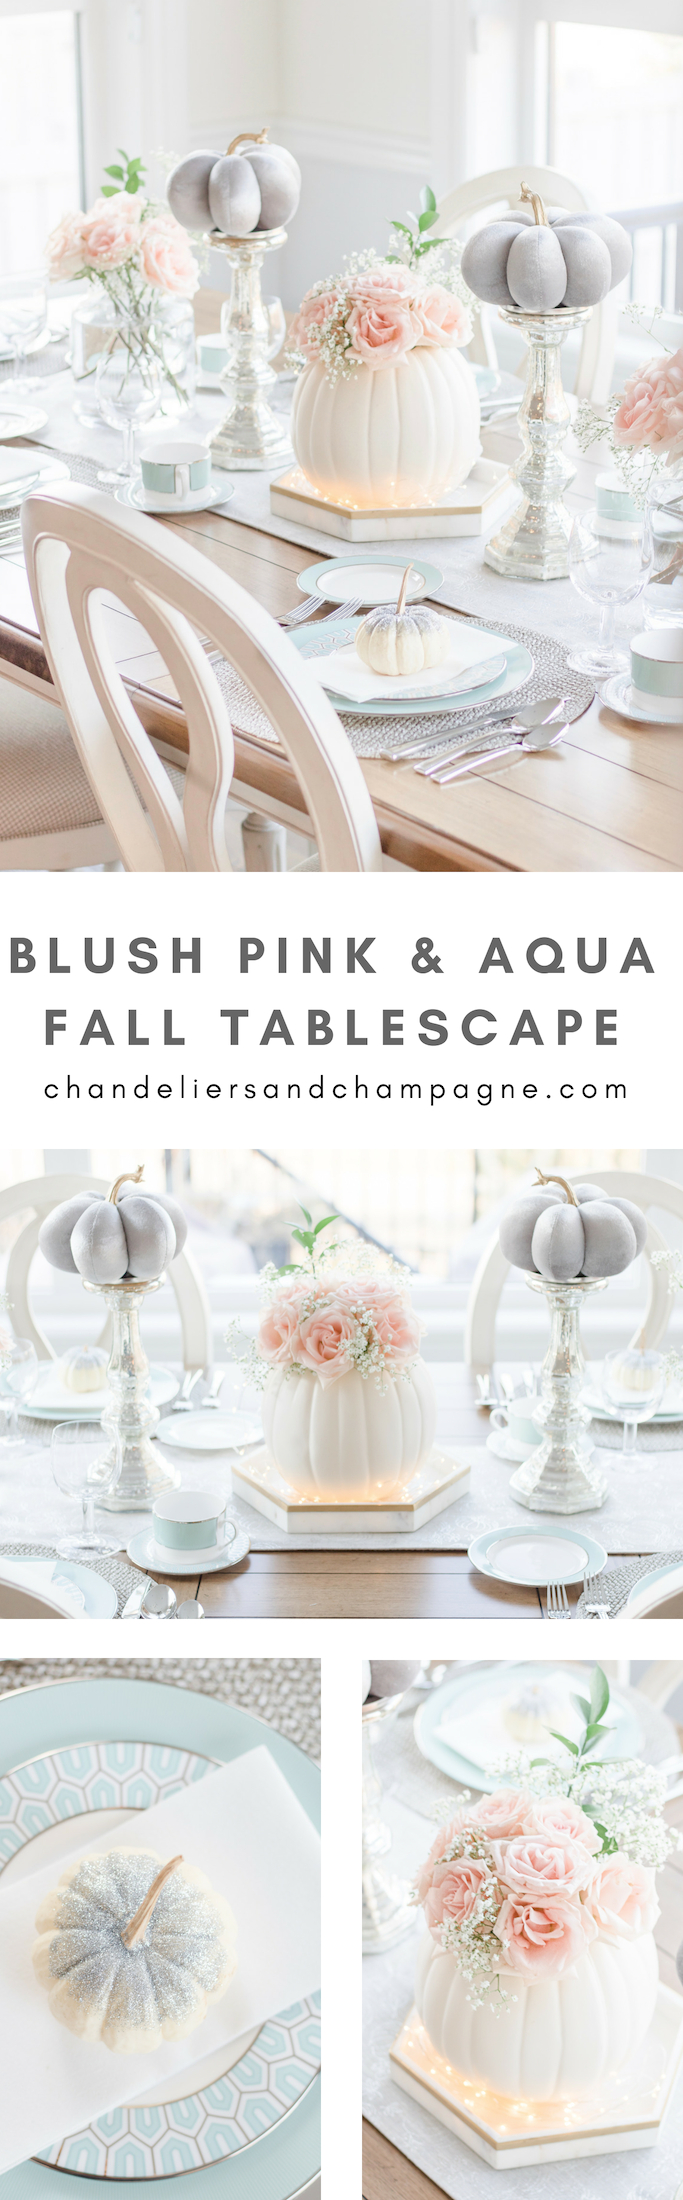 Blush pink and aqua fall tablescape, blush pink and aqua fall table setting, blush pink and aqua Thanksgiving table setting with pumpkins centerpiece, glitter pumpkins, fresh roses